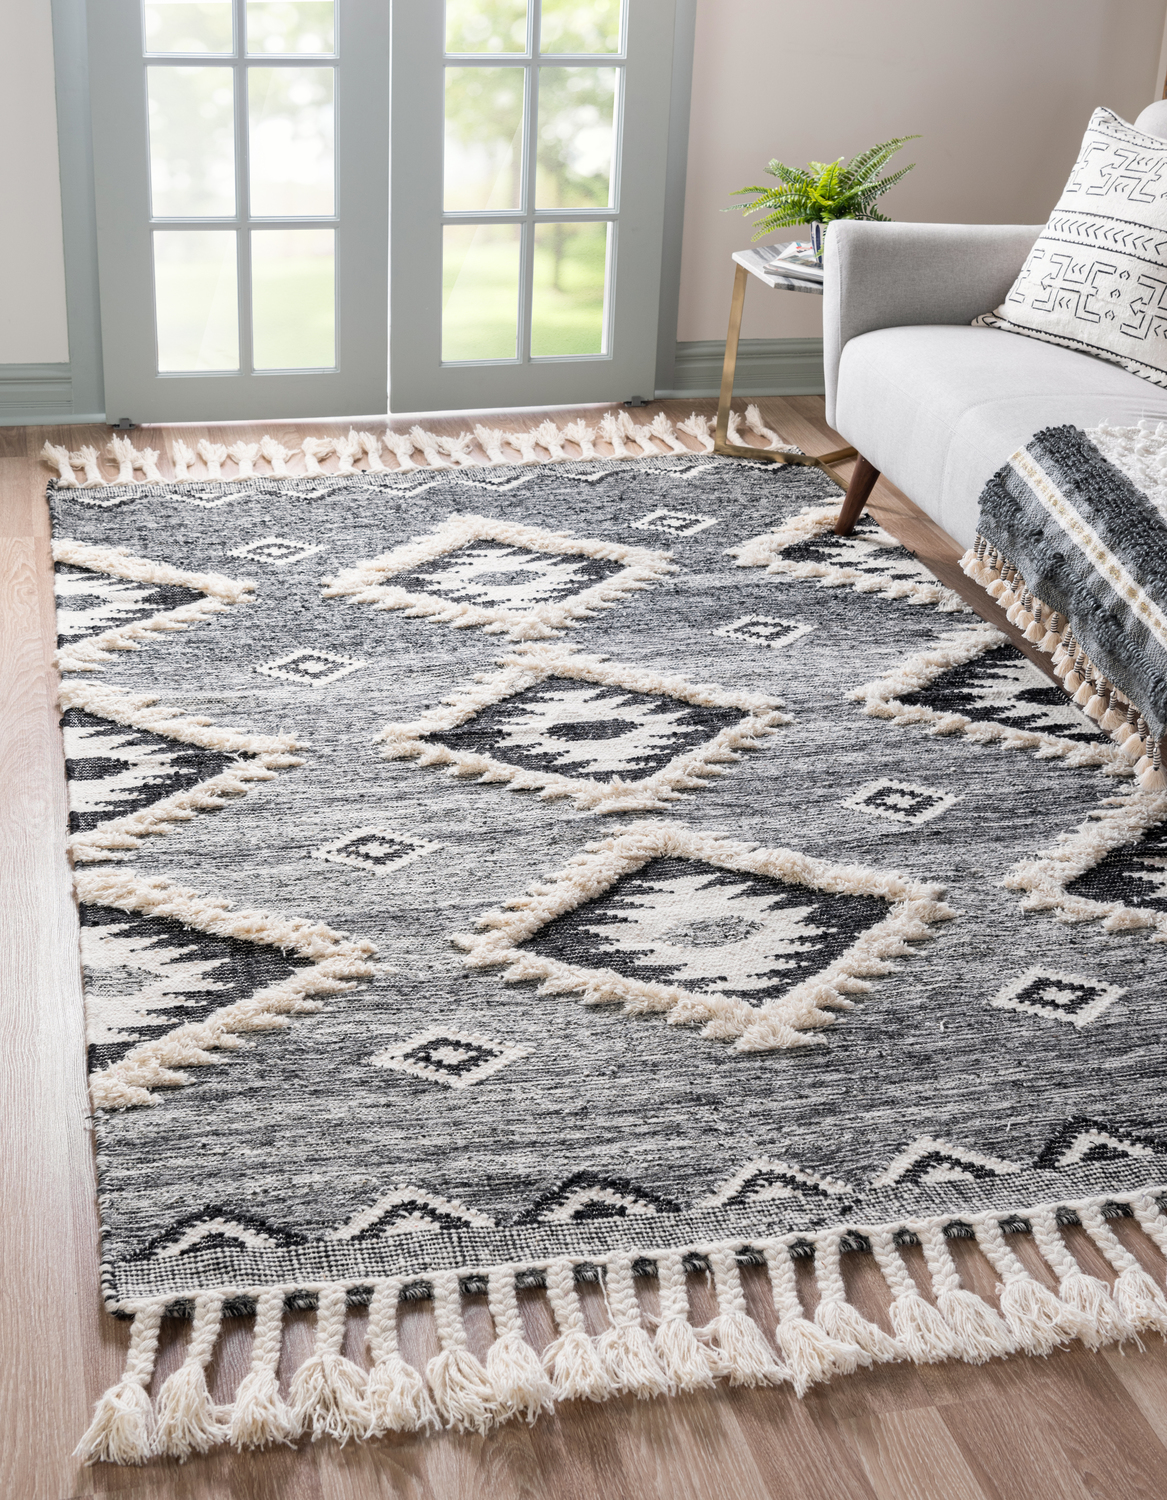 6 by 9 carpet Unique Loom Area Rugs Charcoal Hand Woven; 3x2